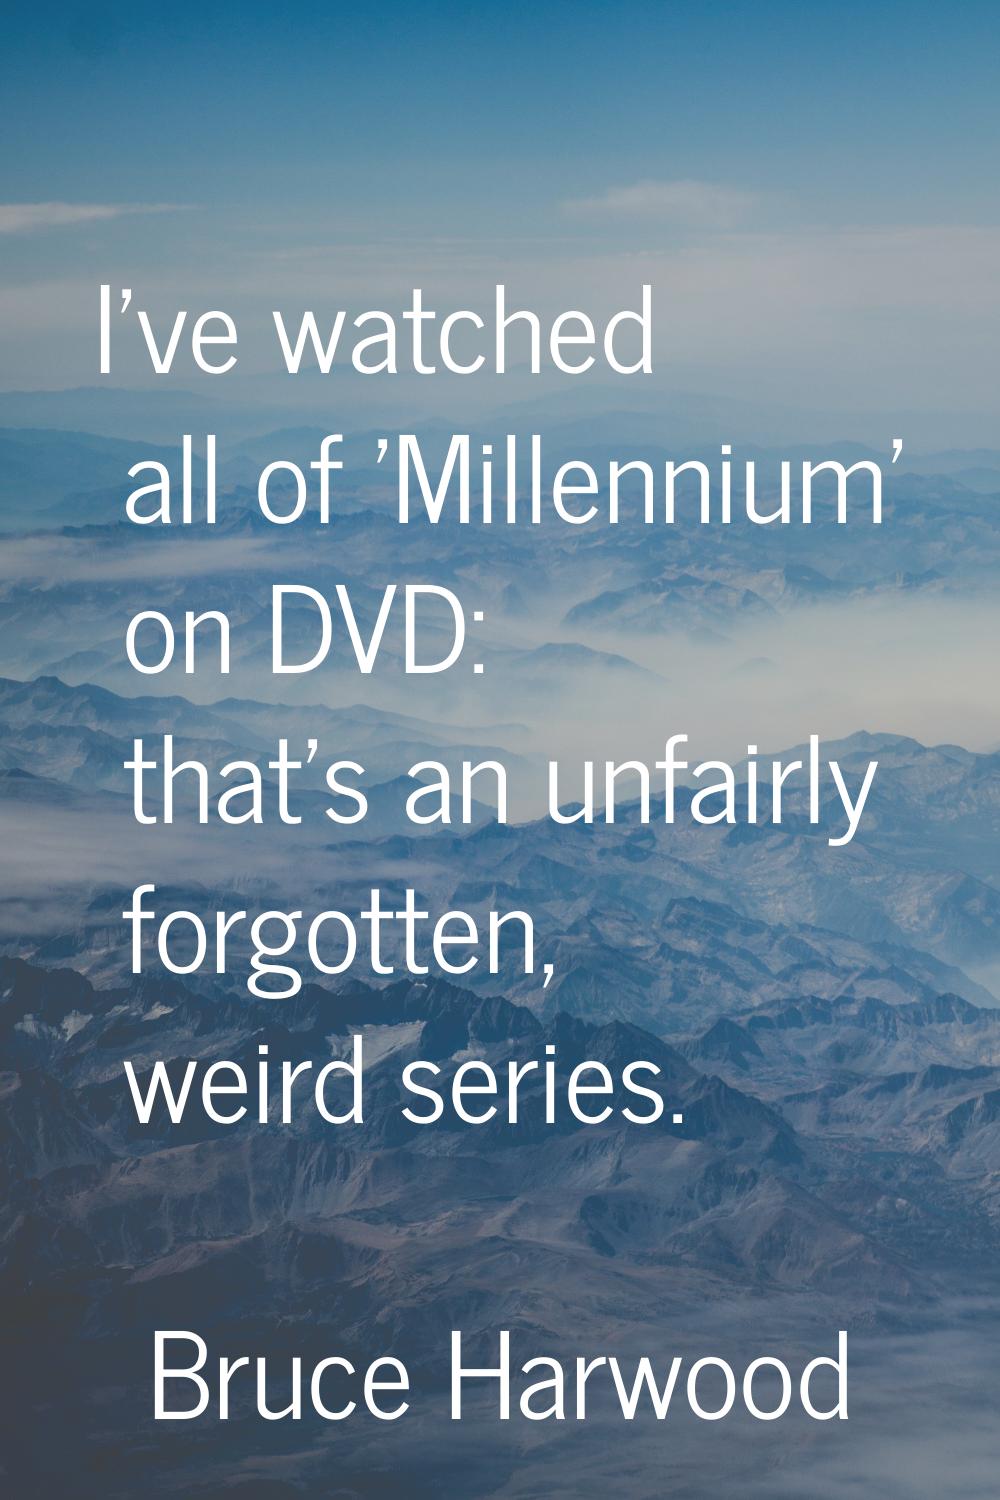 I've watched all of 'Millennium' on DVD: that's an unfairly forgotten, weird series.